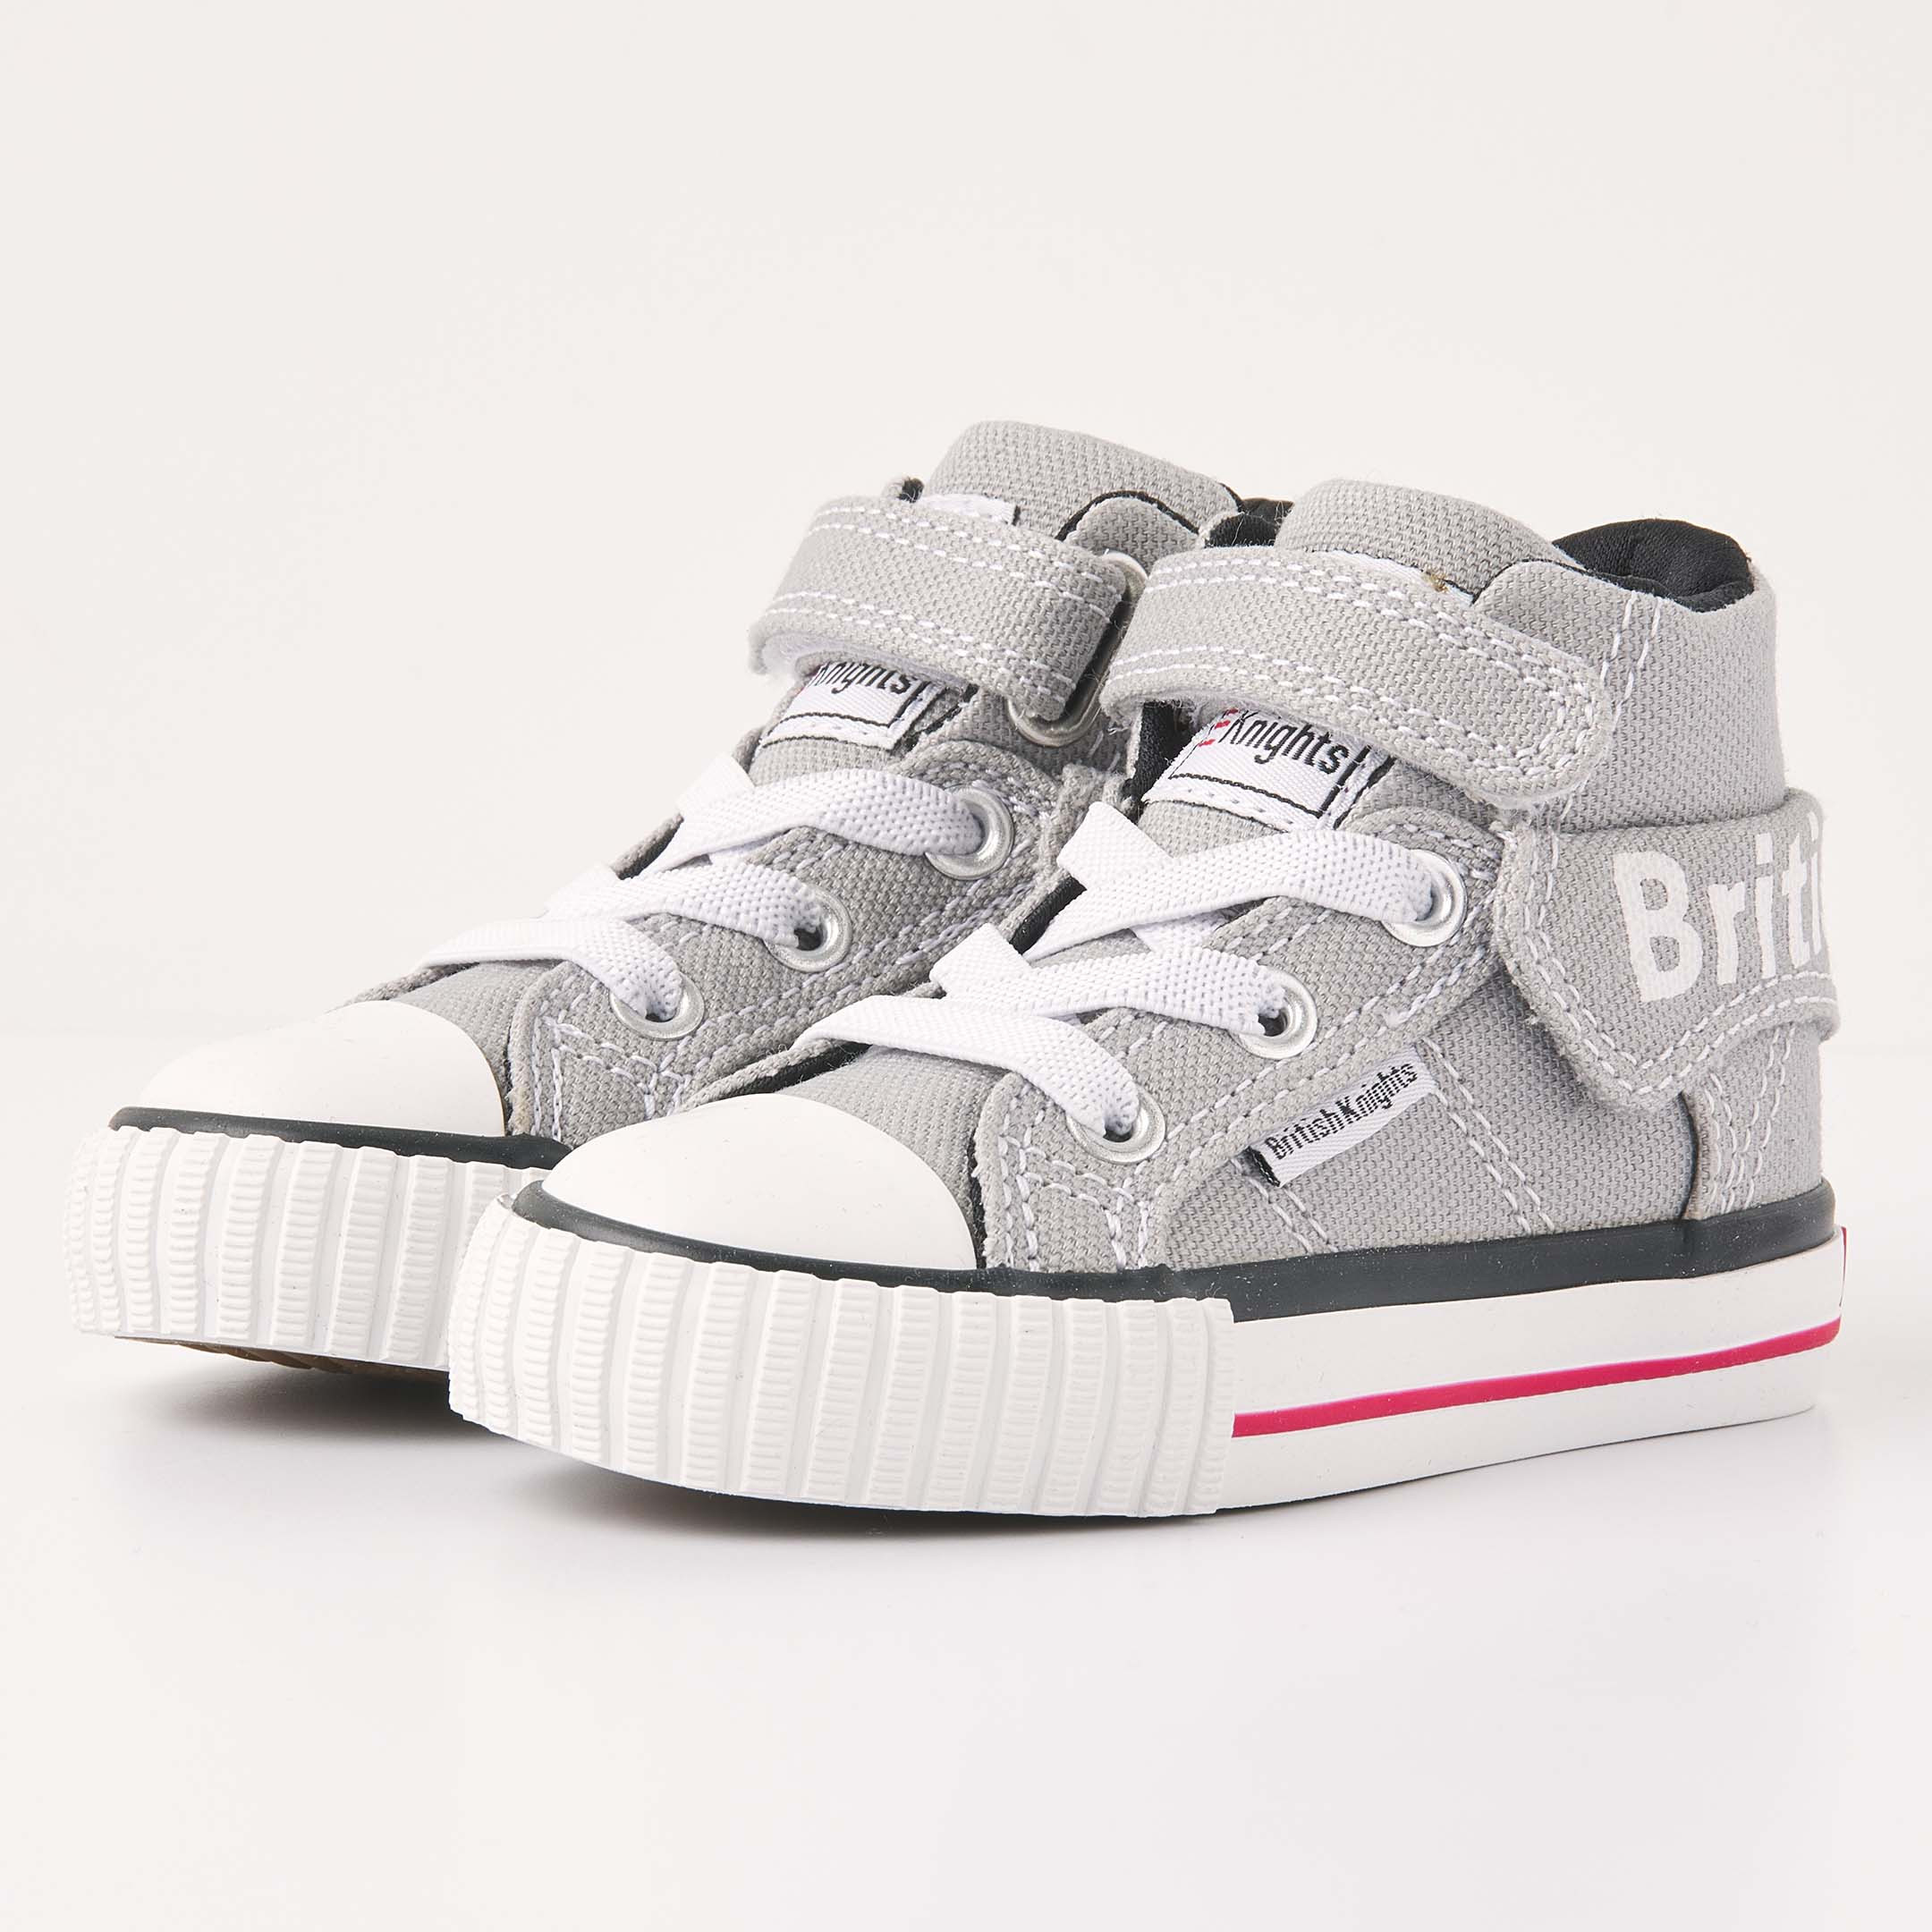 British Knights Sneaker Front view  B51-3742I-04 ROCO HIGH-TOP MALE